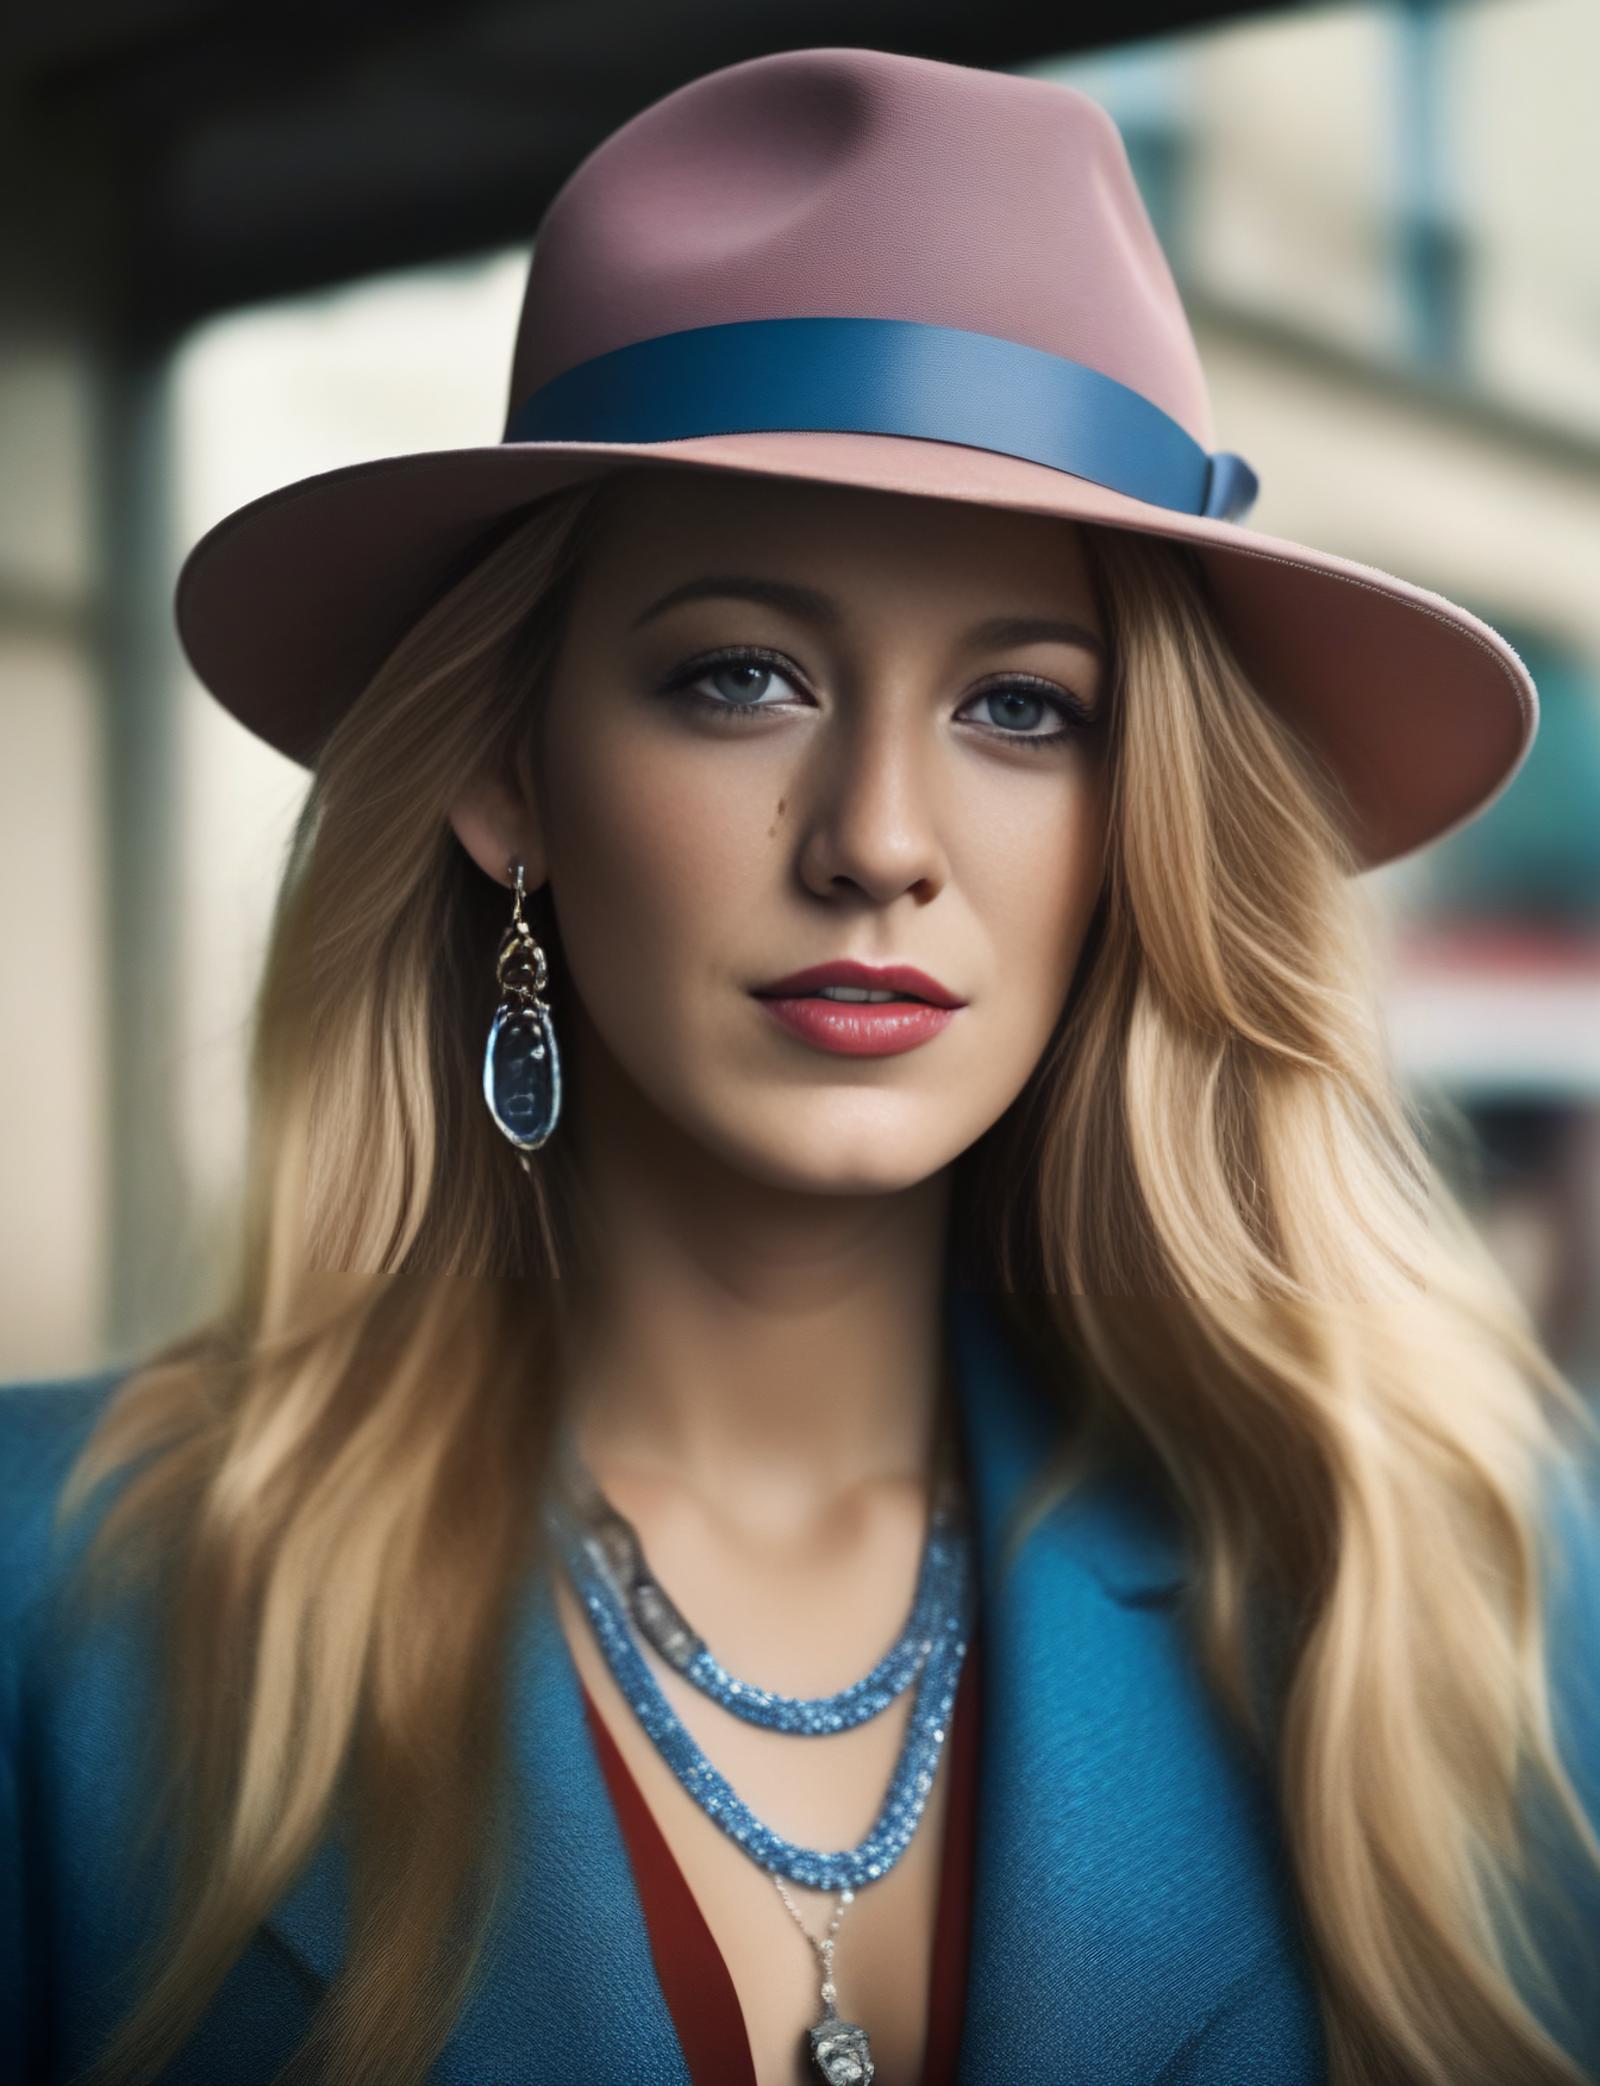 Blake Lively image by parar20